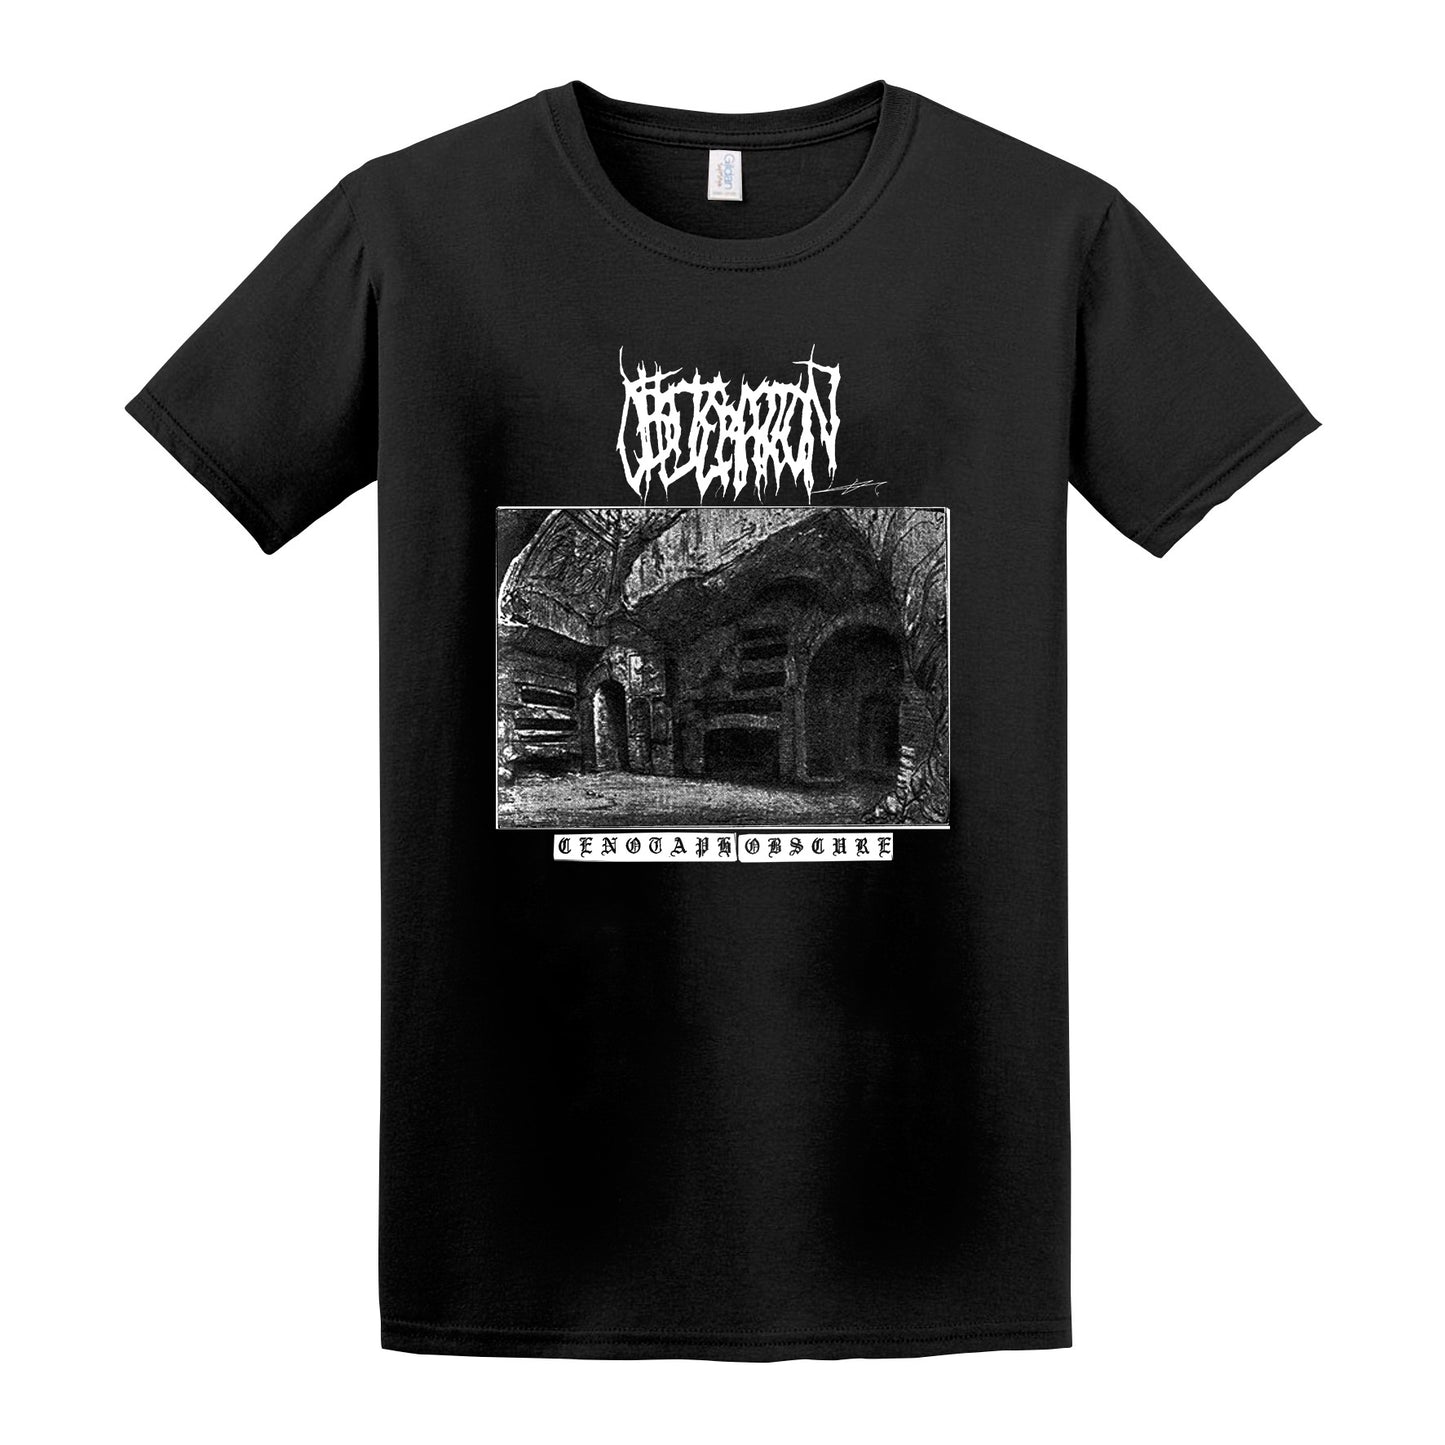 OBLITERATION - Cenotaph Obscure (T-Shirt)